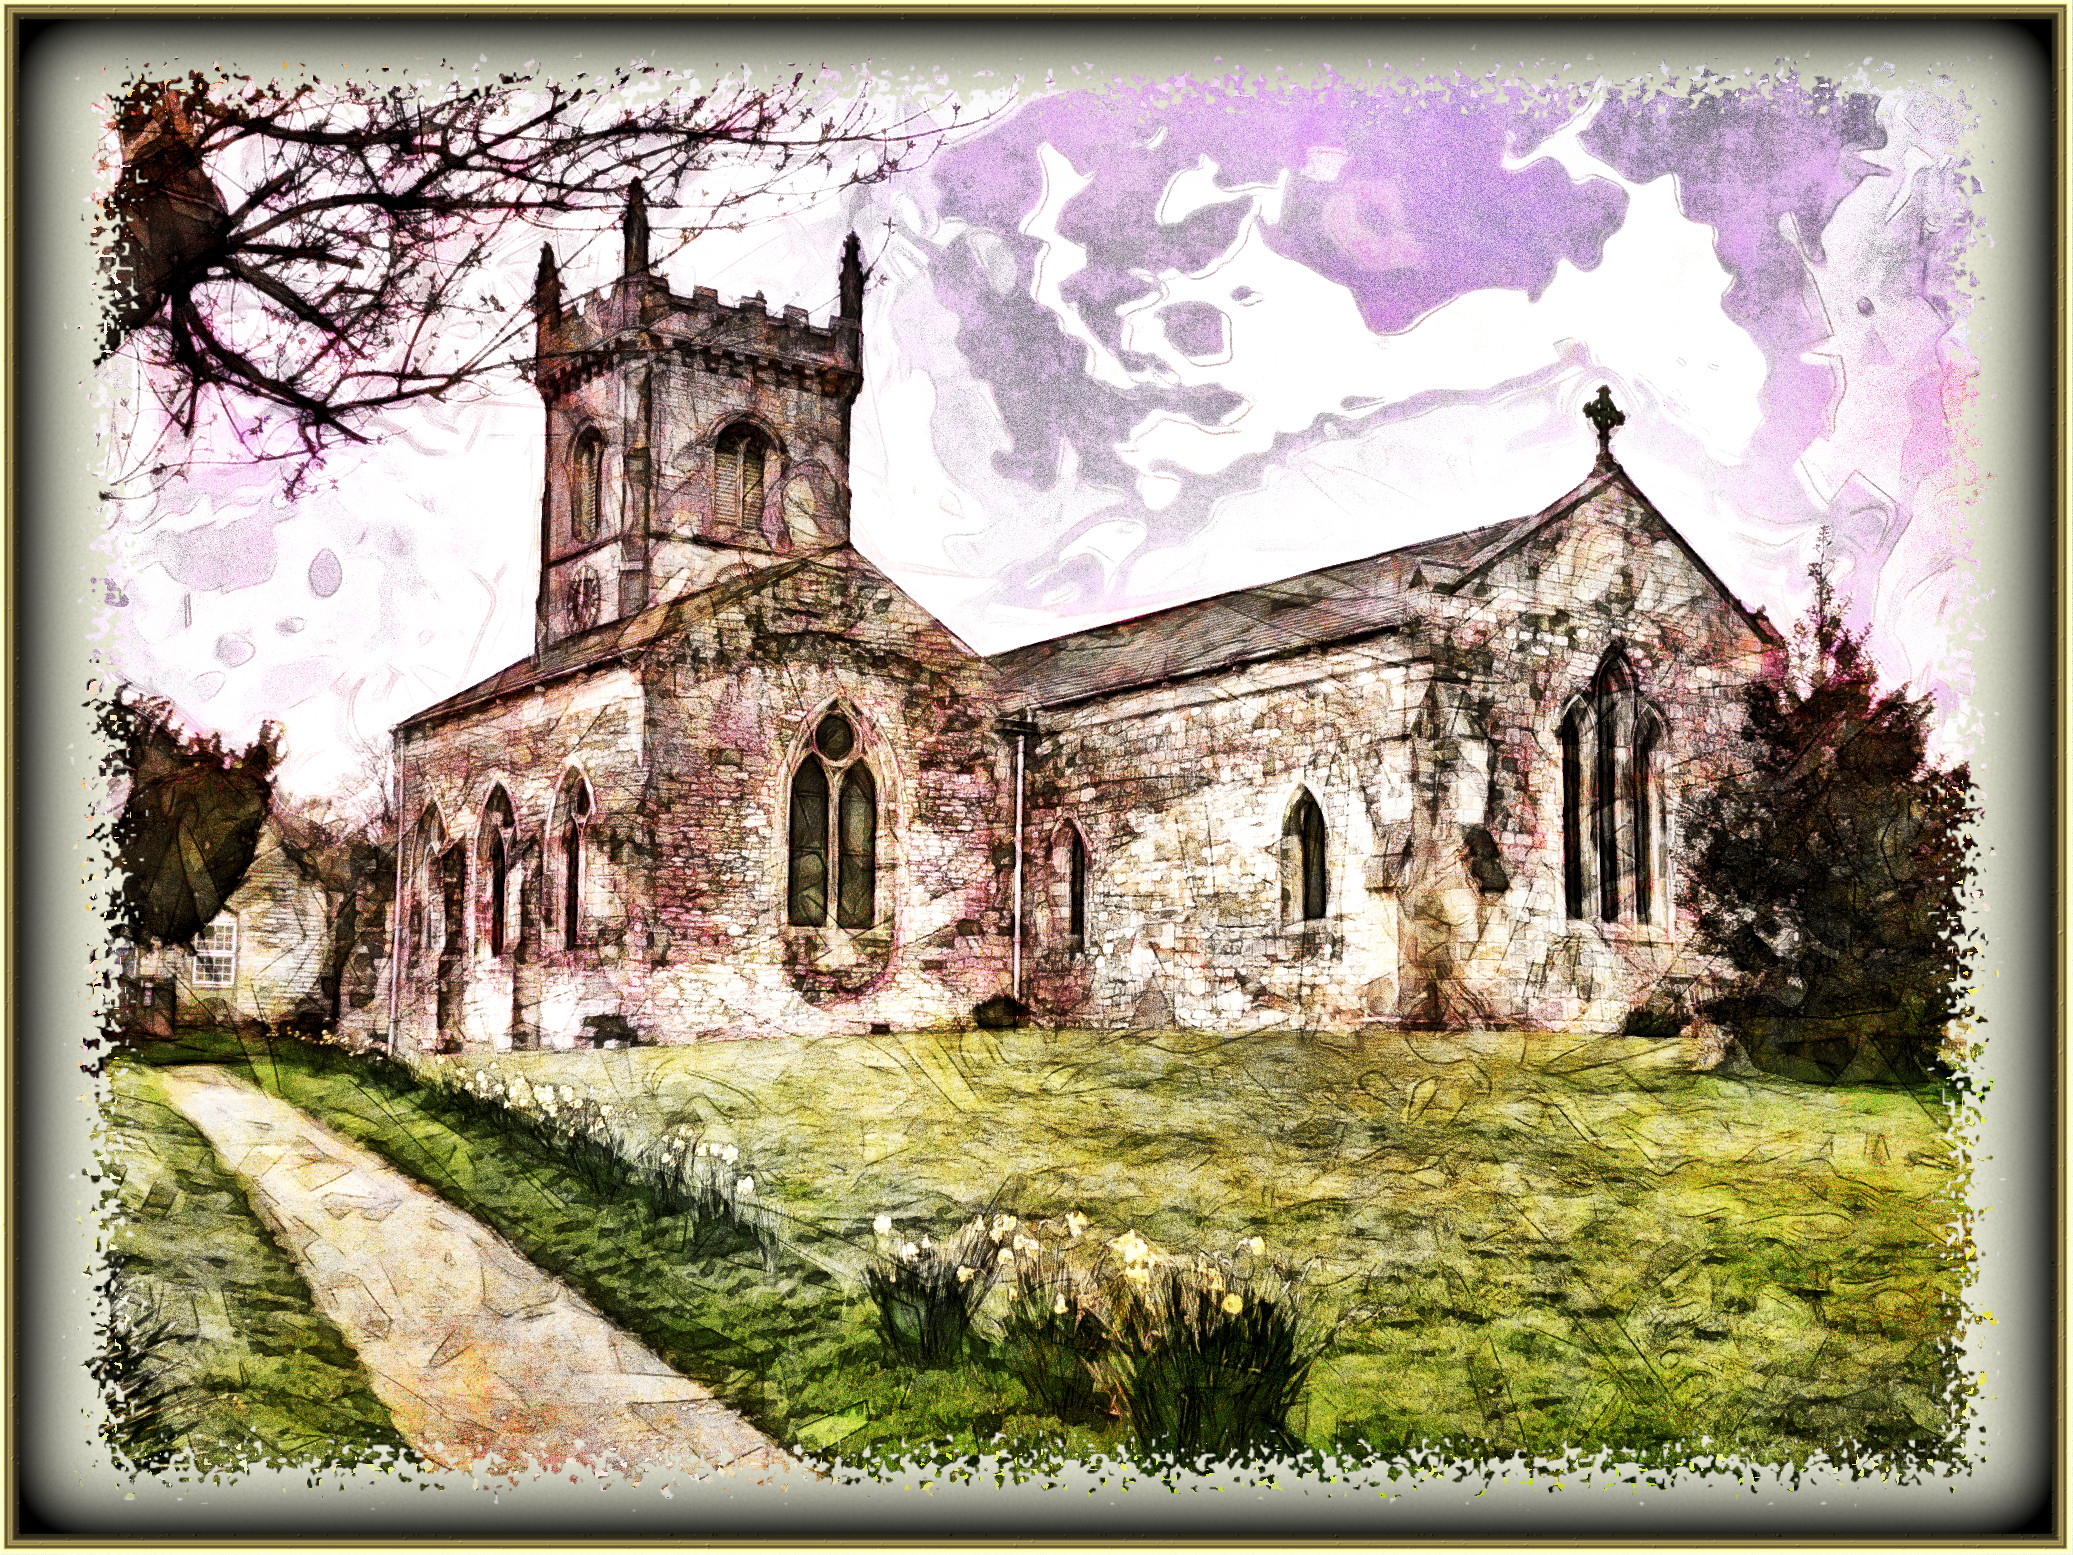 2024-01-12 20-44-39 english-country-church-7912442_1920 with a WaterSketch Effect 2024 (100.0,16.0,90.0,0.0,8.0,-1.0,True,6).JPG